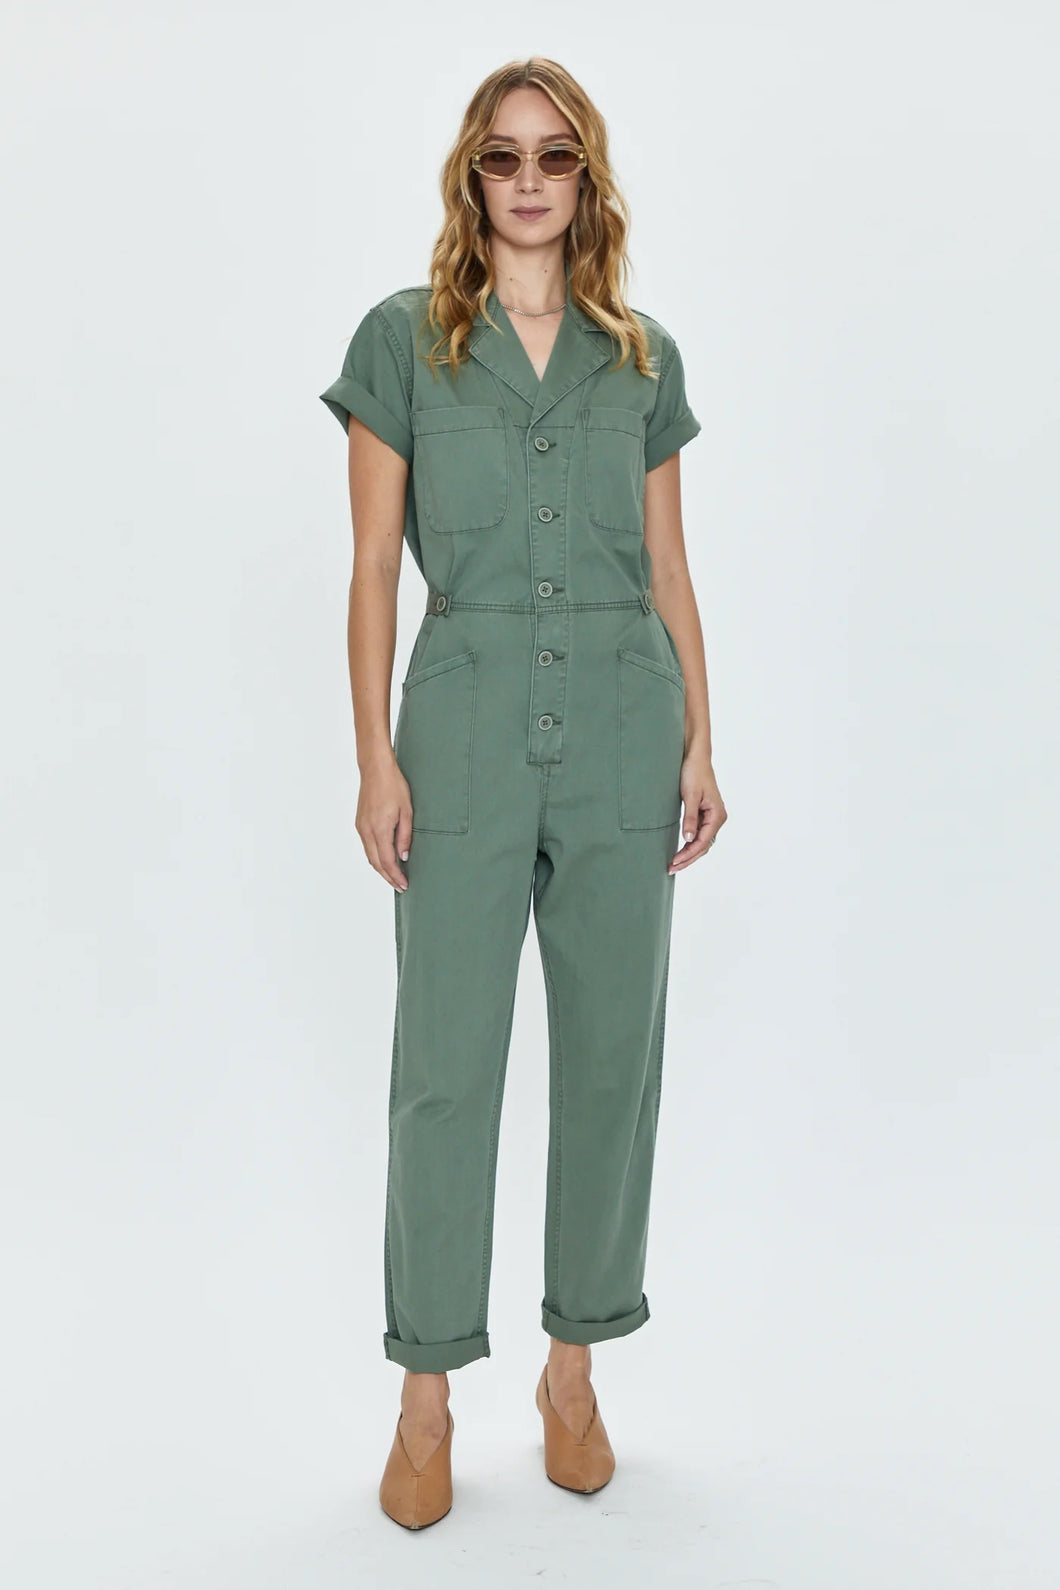 Grover Field Suit -  Colonel Green